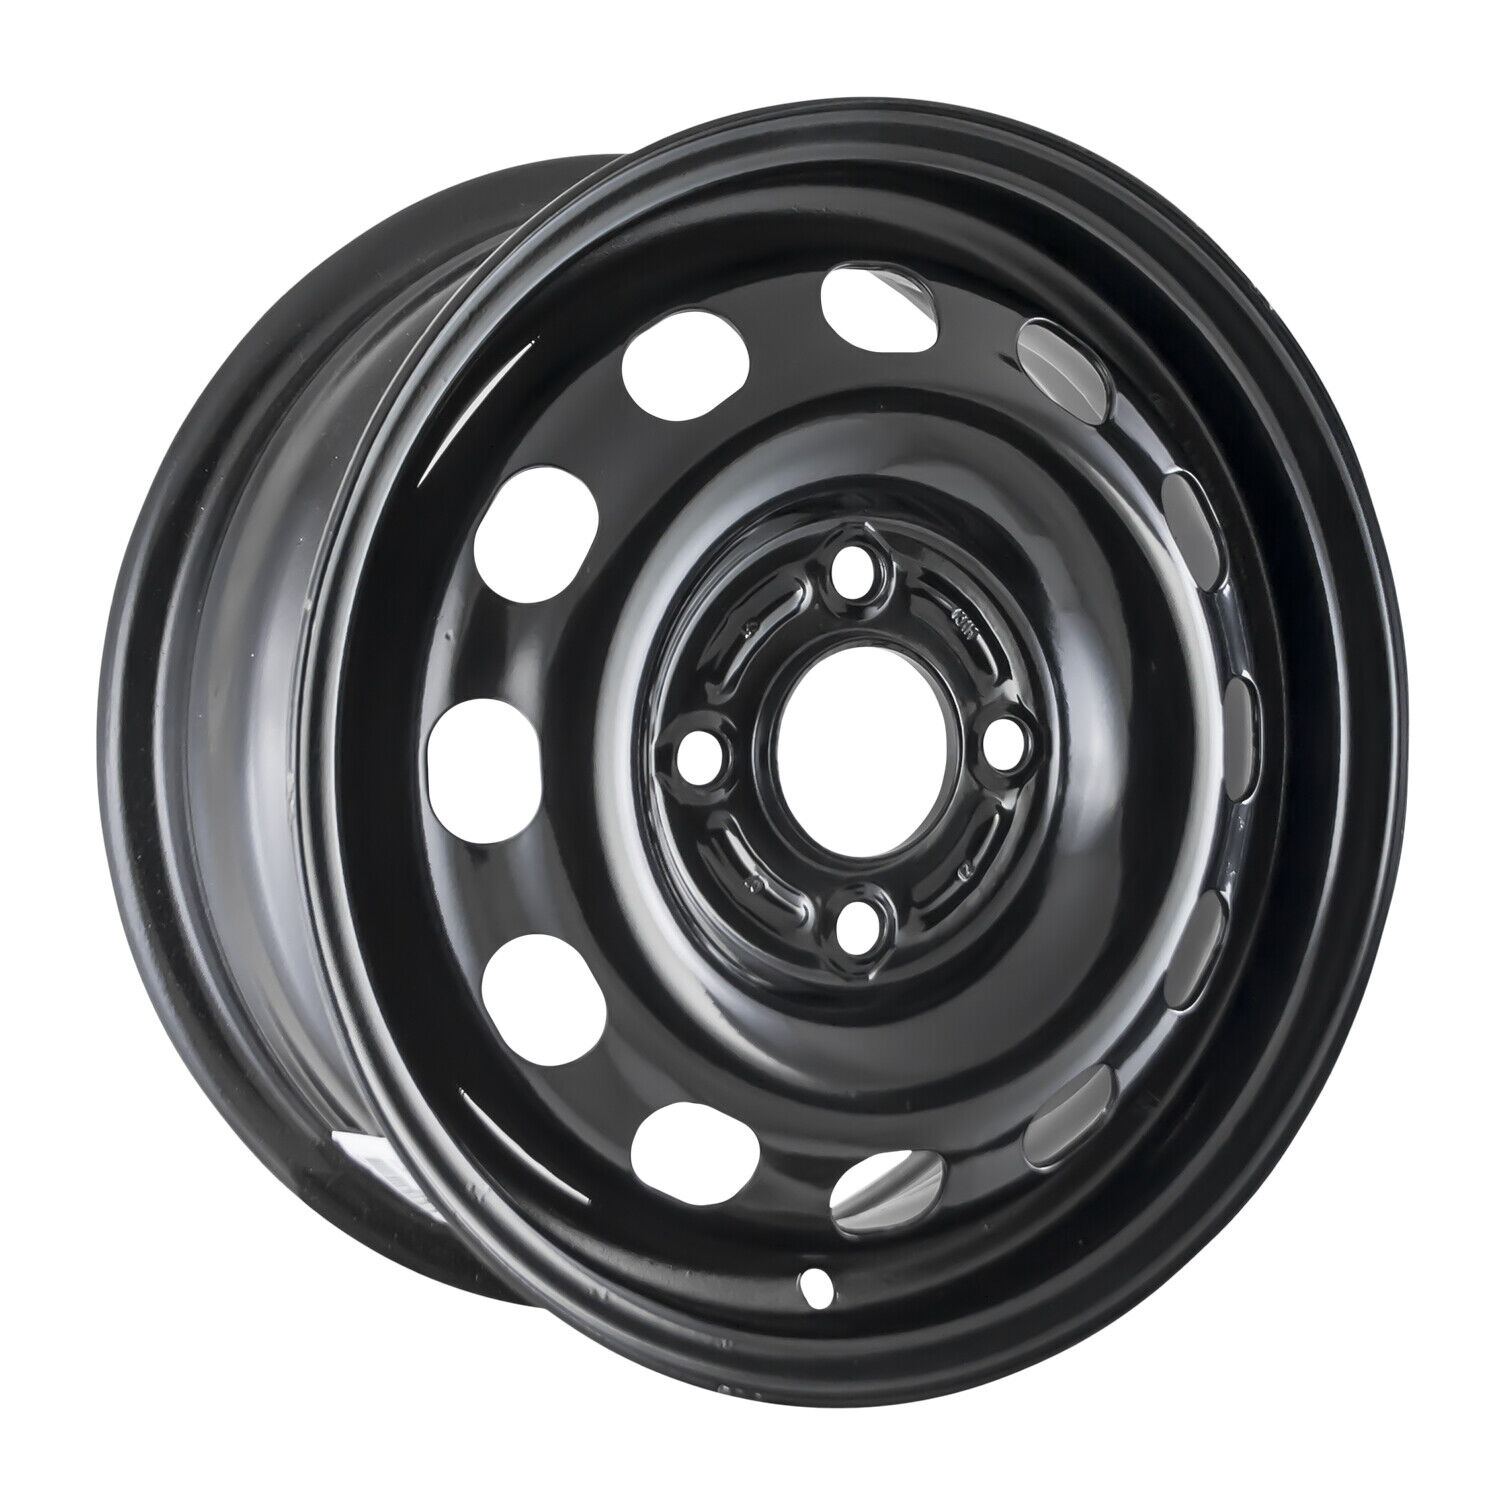 Refurbished 14x5.5 Painted Black Wheel fits 1995-2000 Ford Contour 560-03114